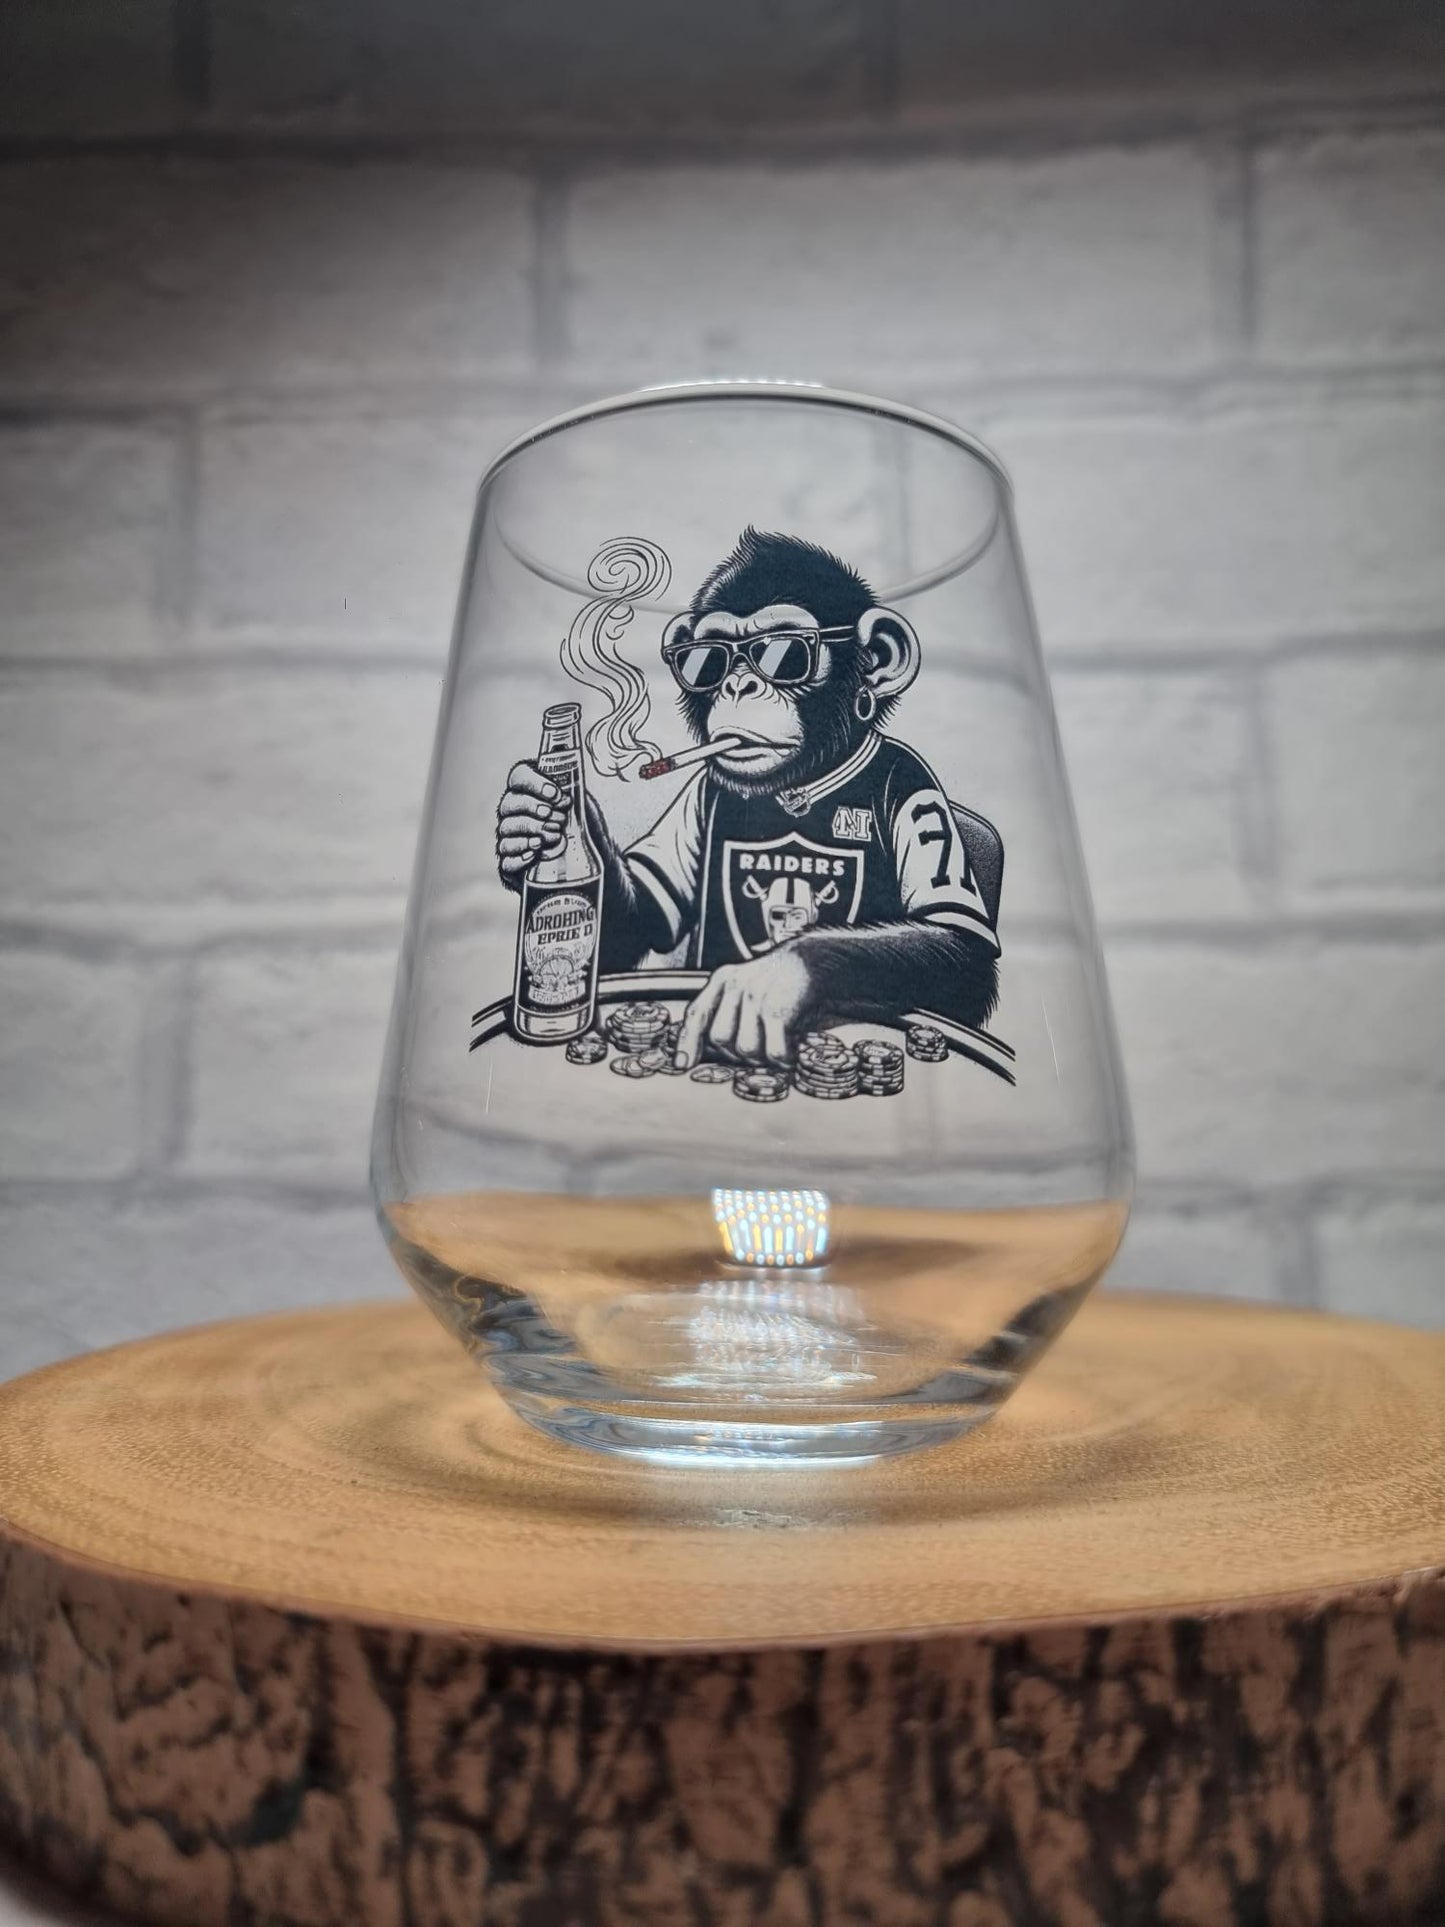 Monkeying Around the Tables: Poker-Playing Primate Brewmaster Allegra Glass - A Winning Gift for Vegas Vibes